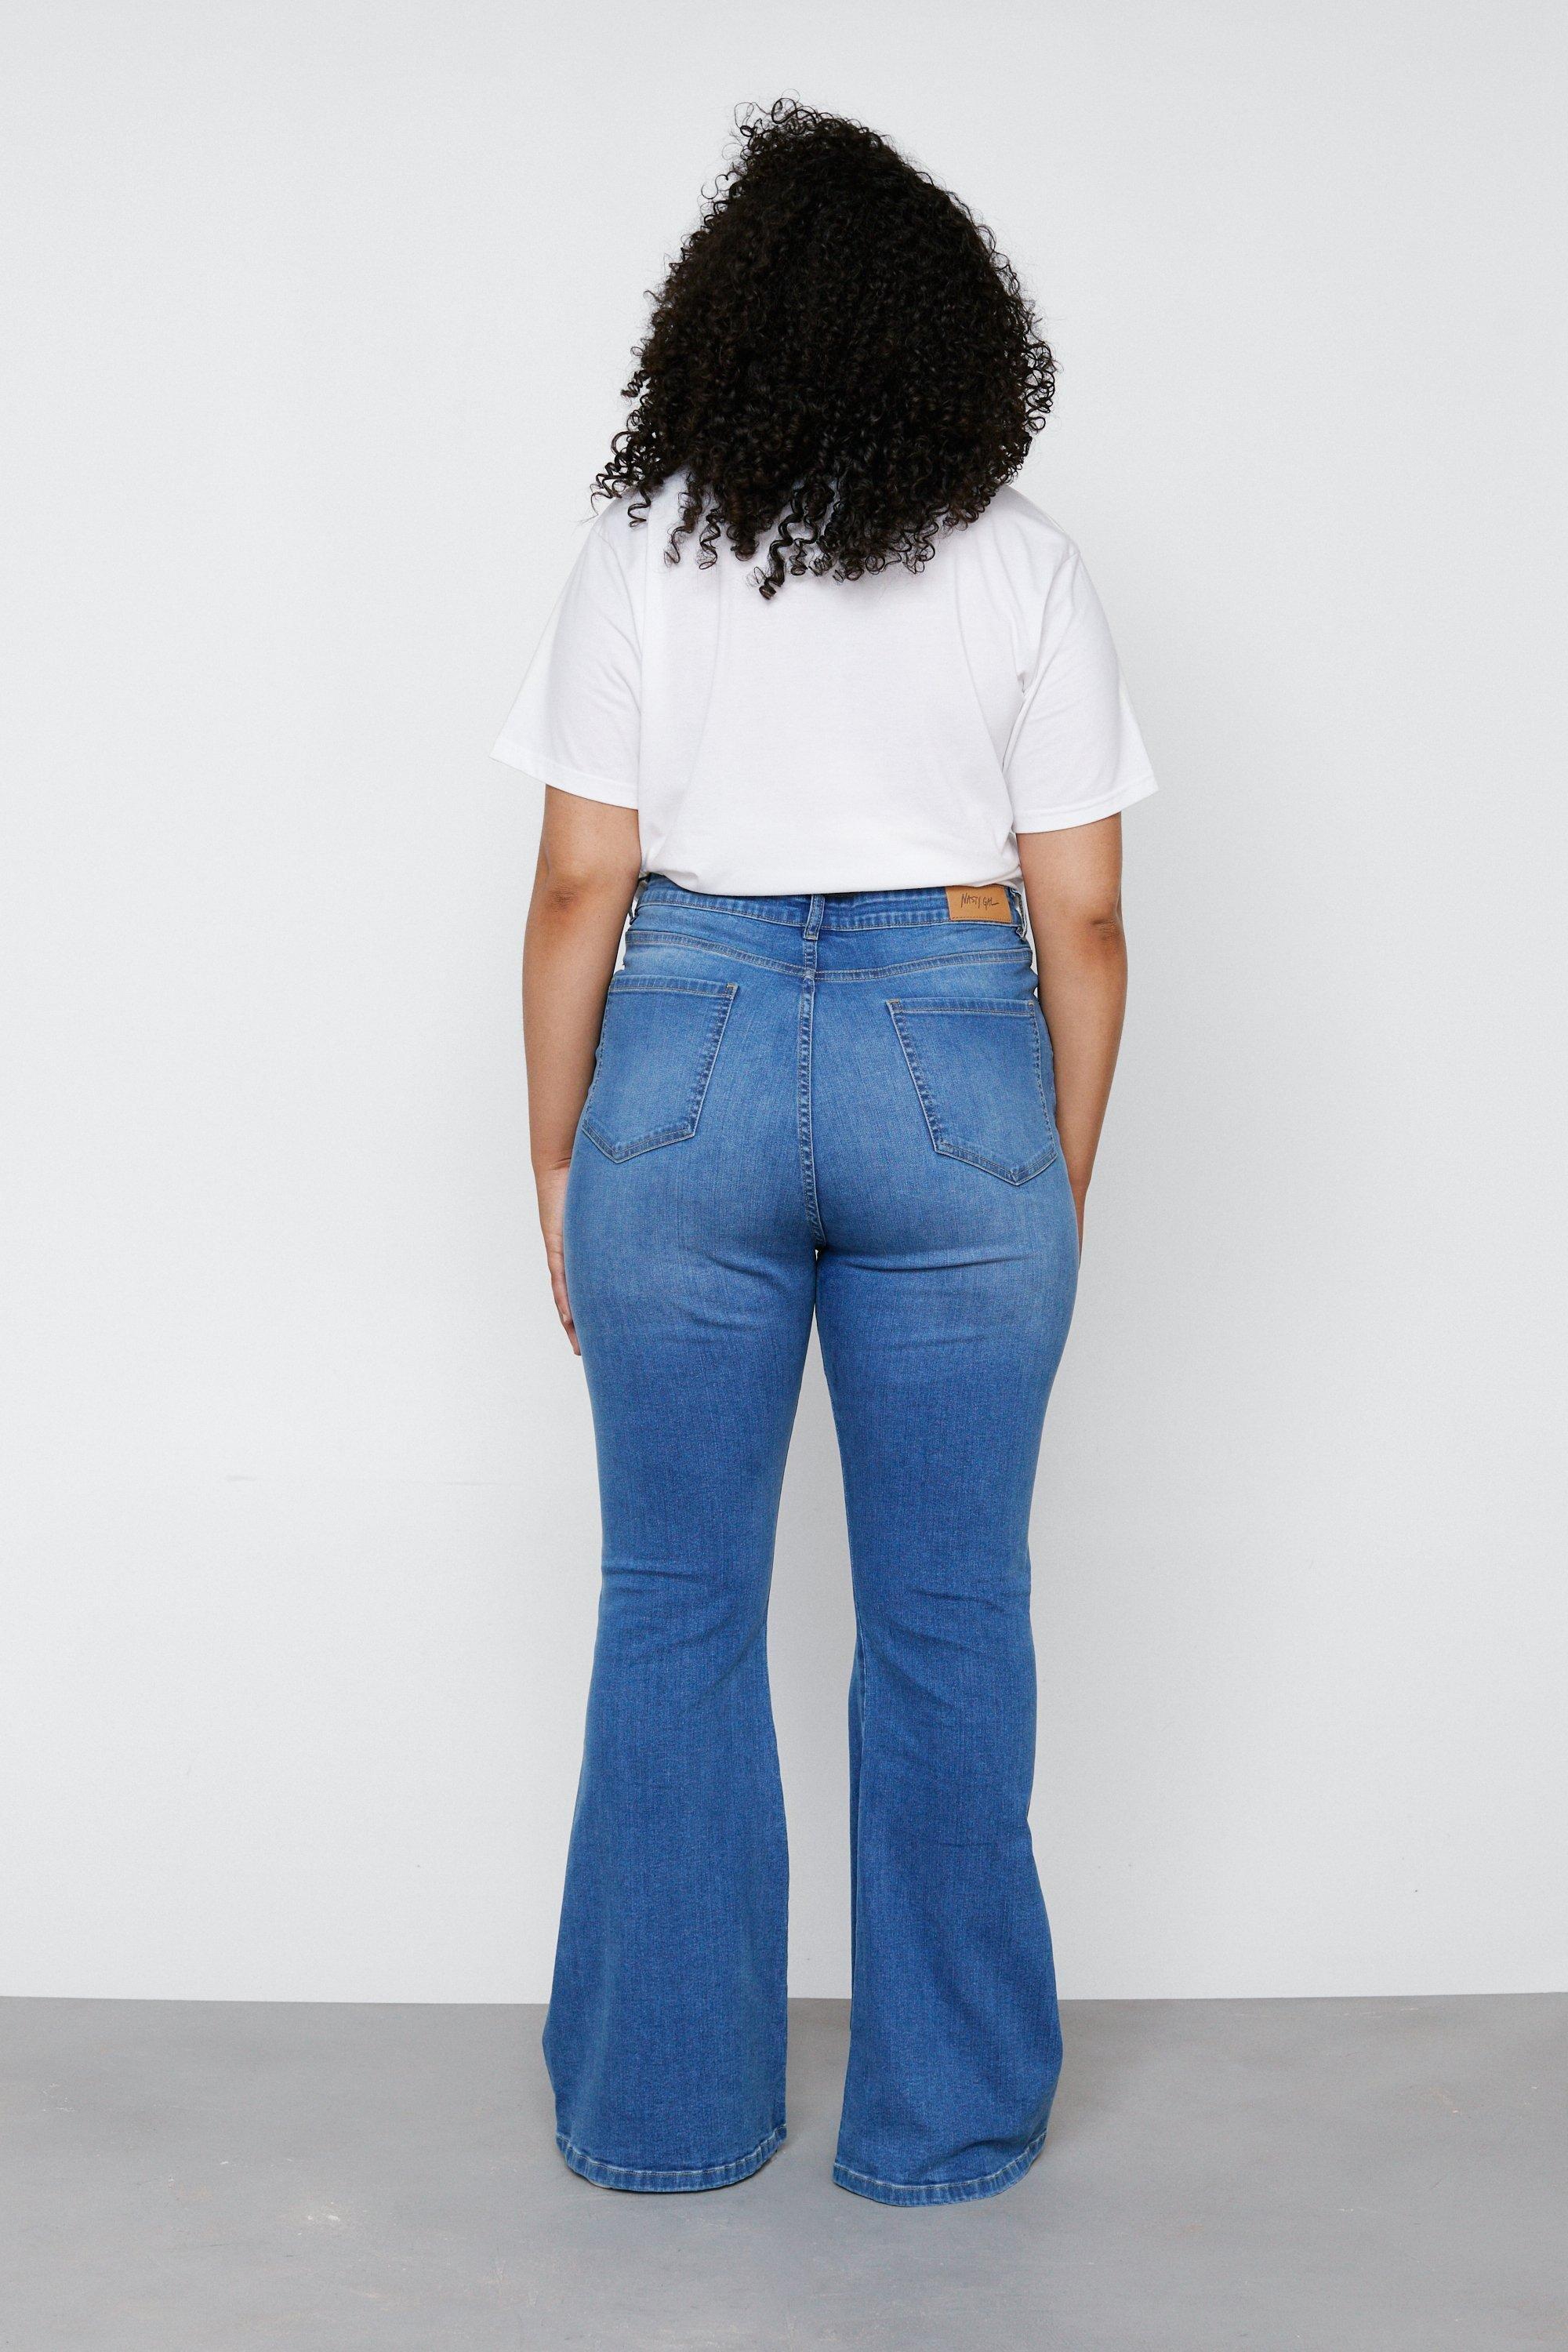 Plus Size High Waisted Stretch Pants | Nasty Gal